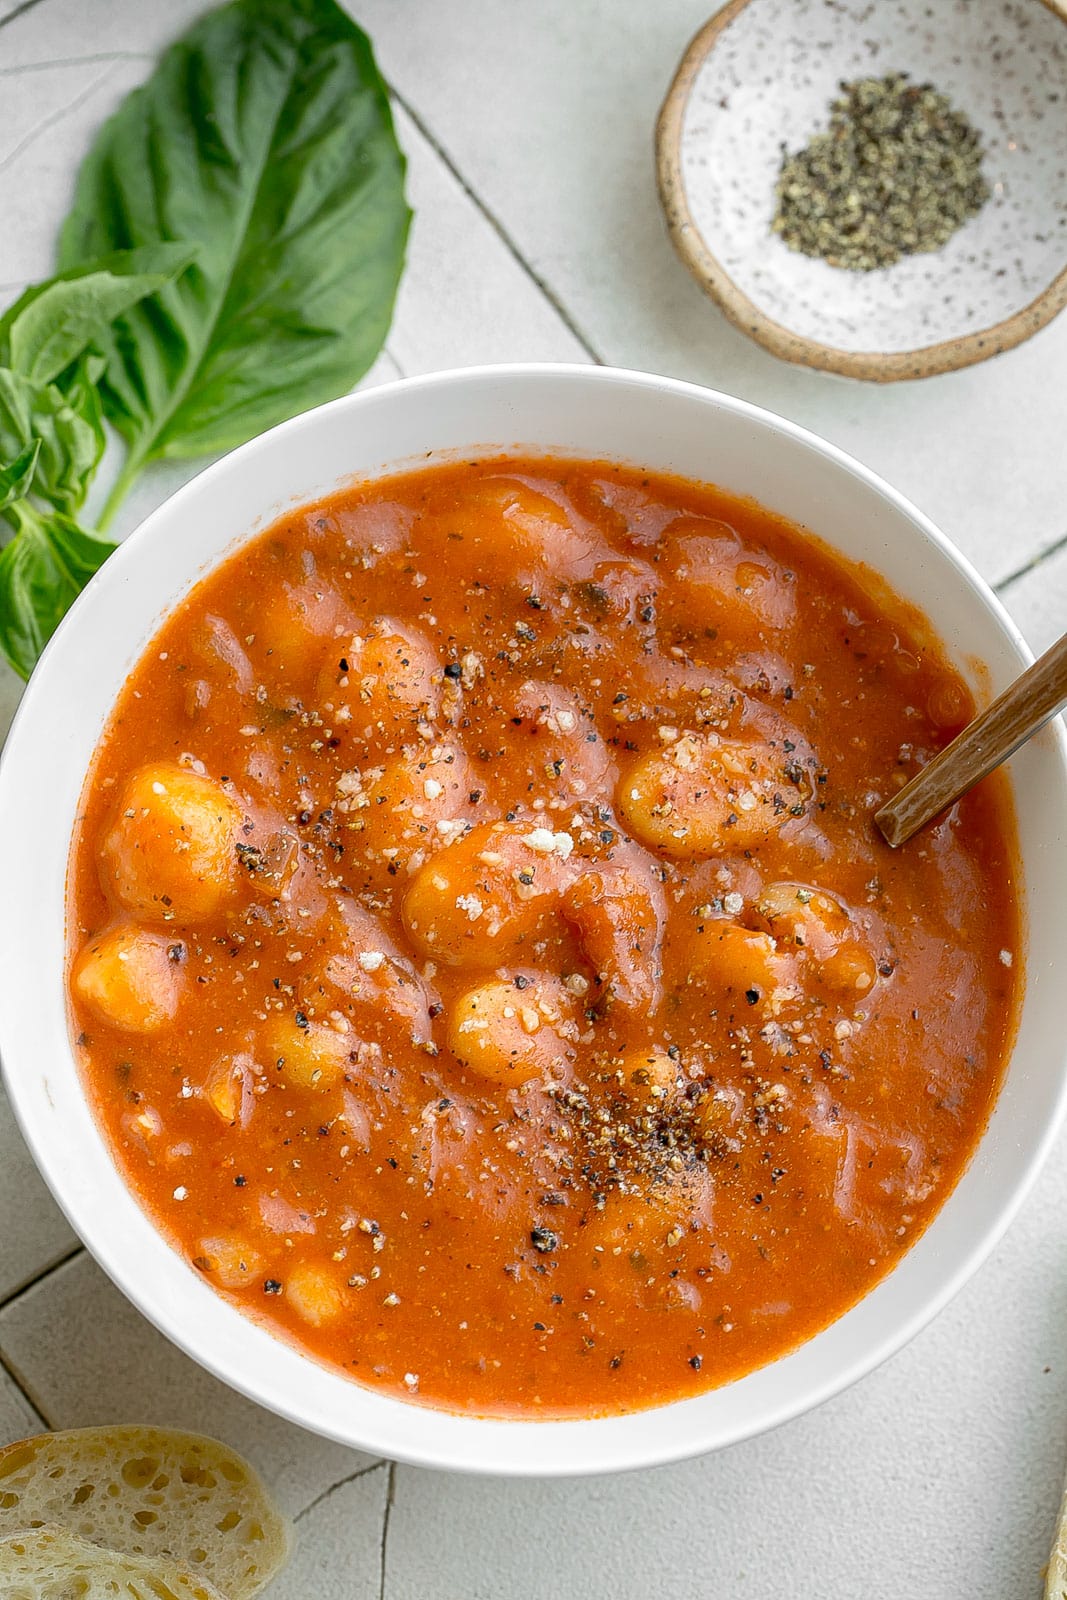 Bowl of tomato soup with gnocchi.